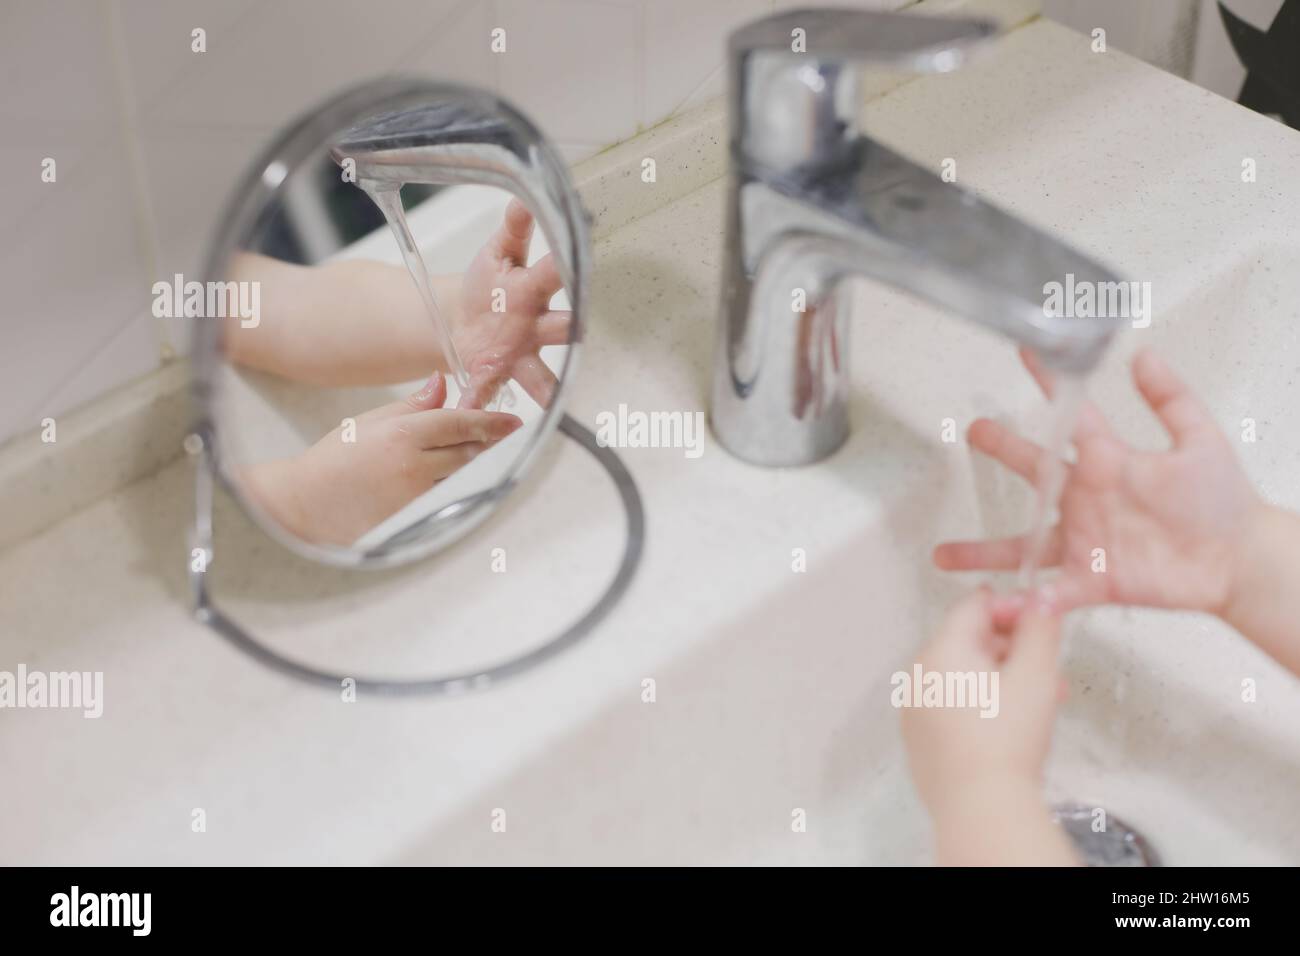 child washing hands under the tap water in the bathroom. kid's hands under stream of water. Stock Photo